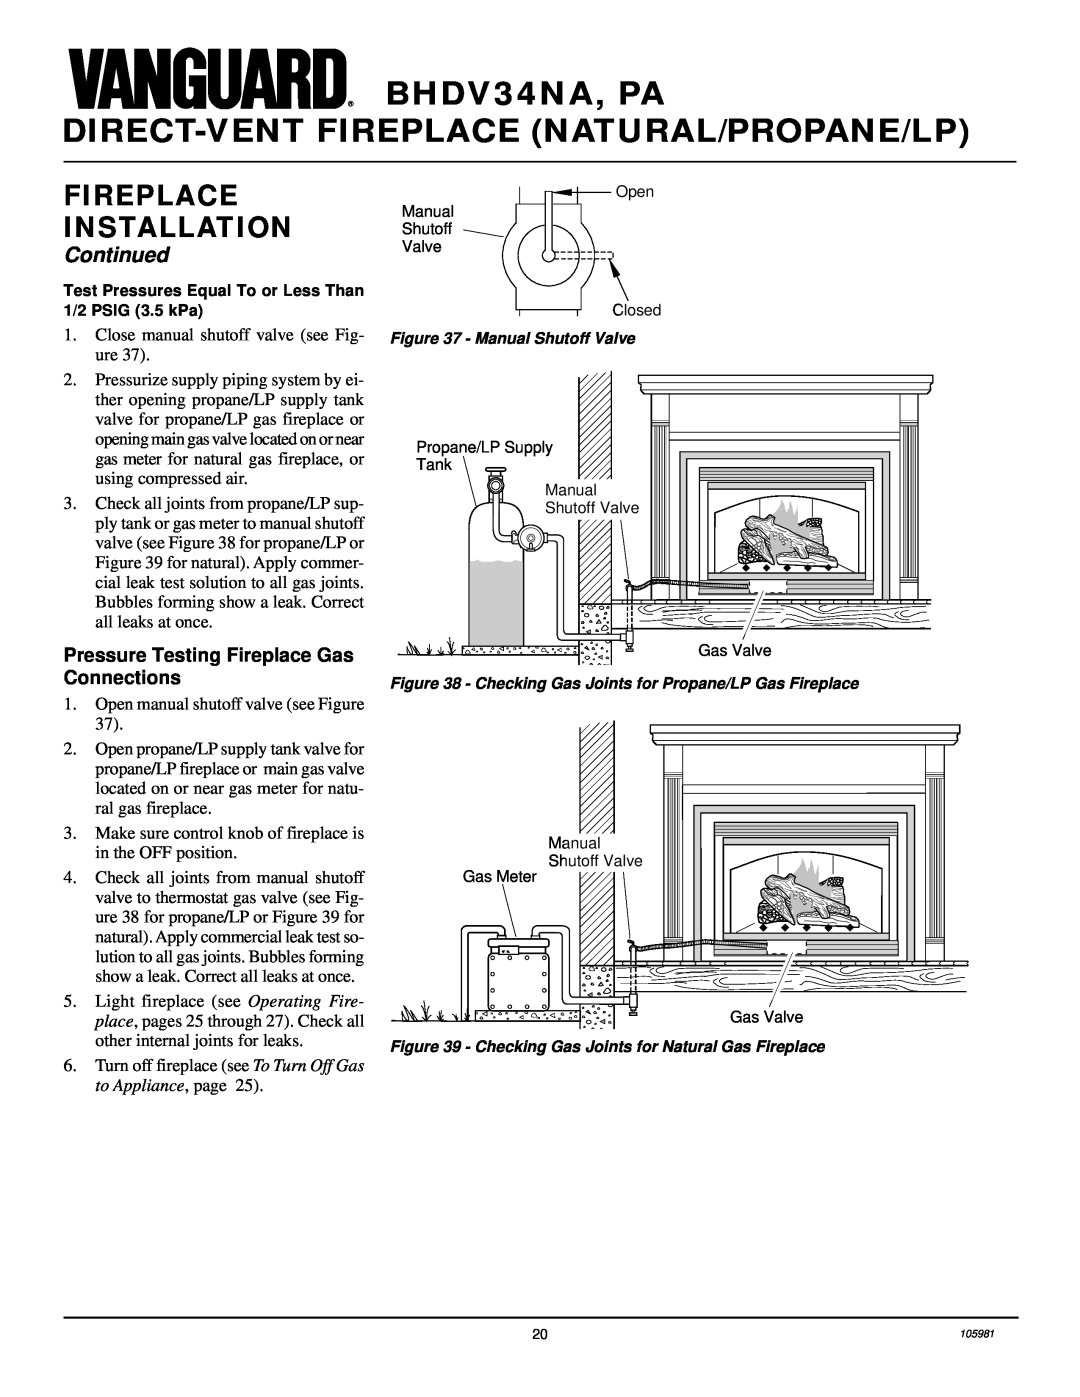 Desa Pressure Testing Fireplace Gas Connections, BHDV34NA, PA, Direct-Ventfireplace Natural/Propane/Lp, Continued 